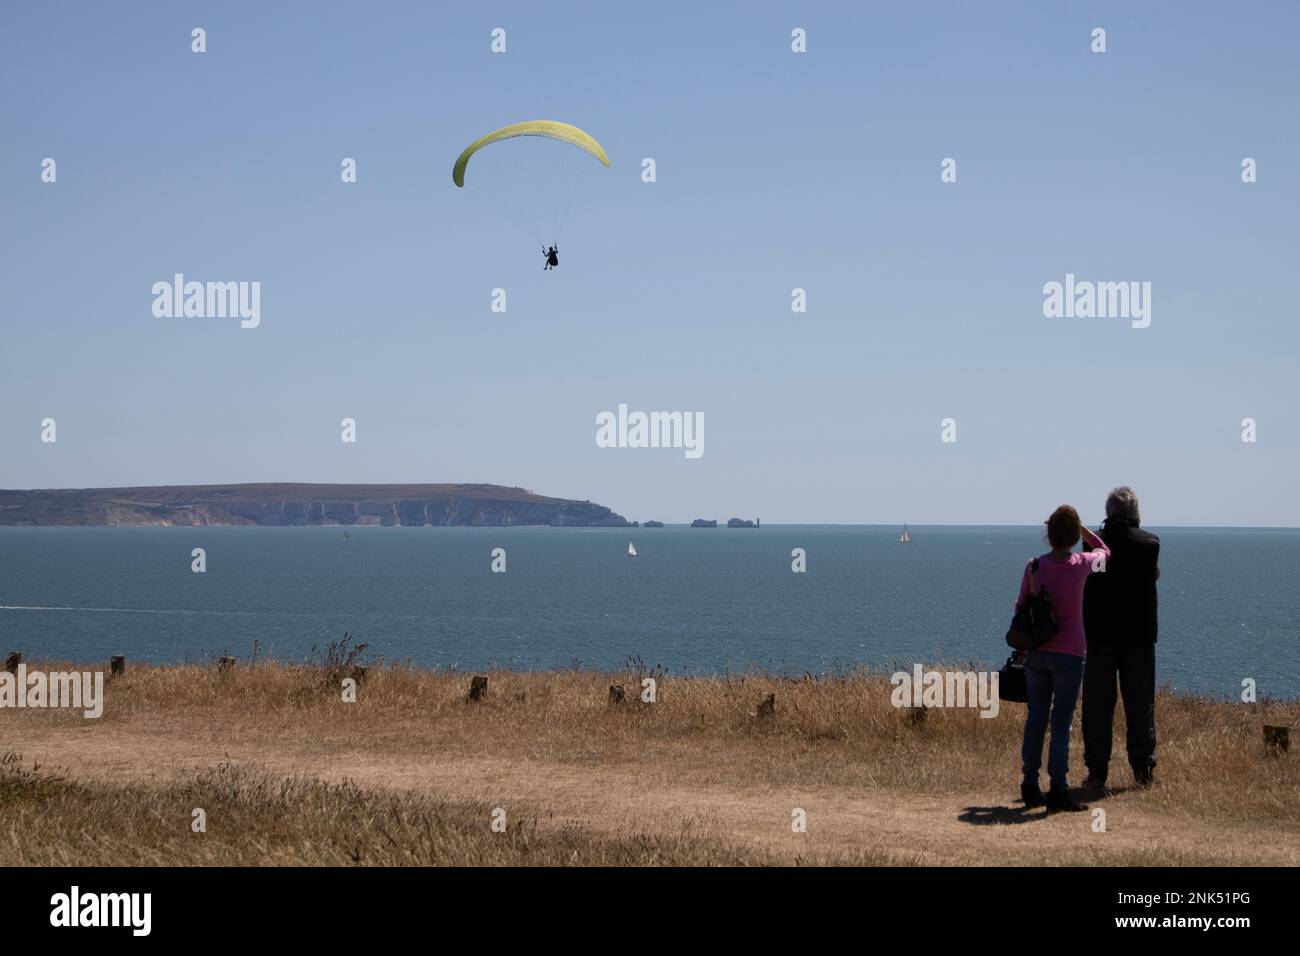 A couple watch a paraglider in the air at Barton-On-Sea, South Coast of England with the Isle of Wight in the distance, United Kingdom Stock Photo